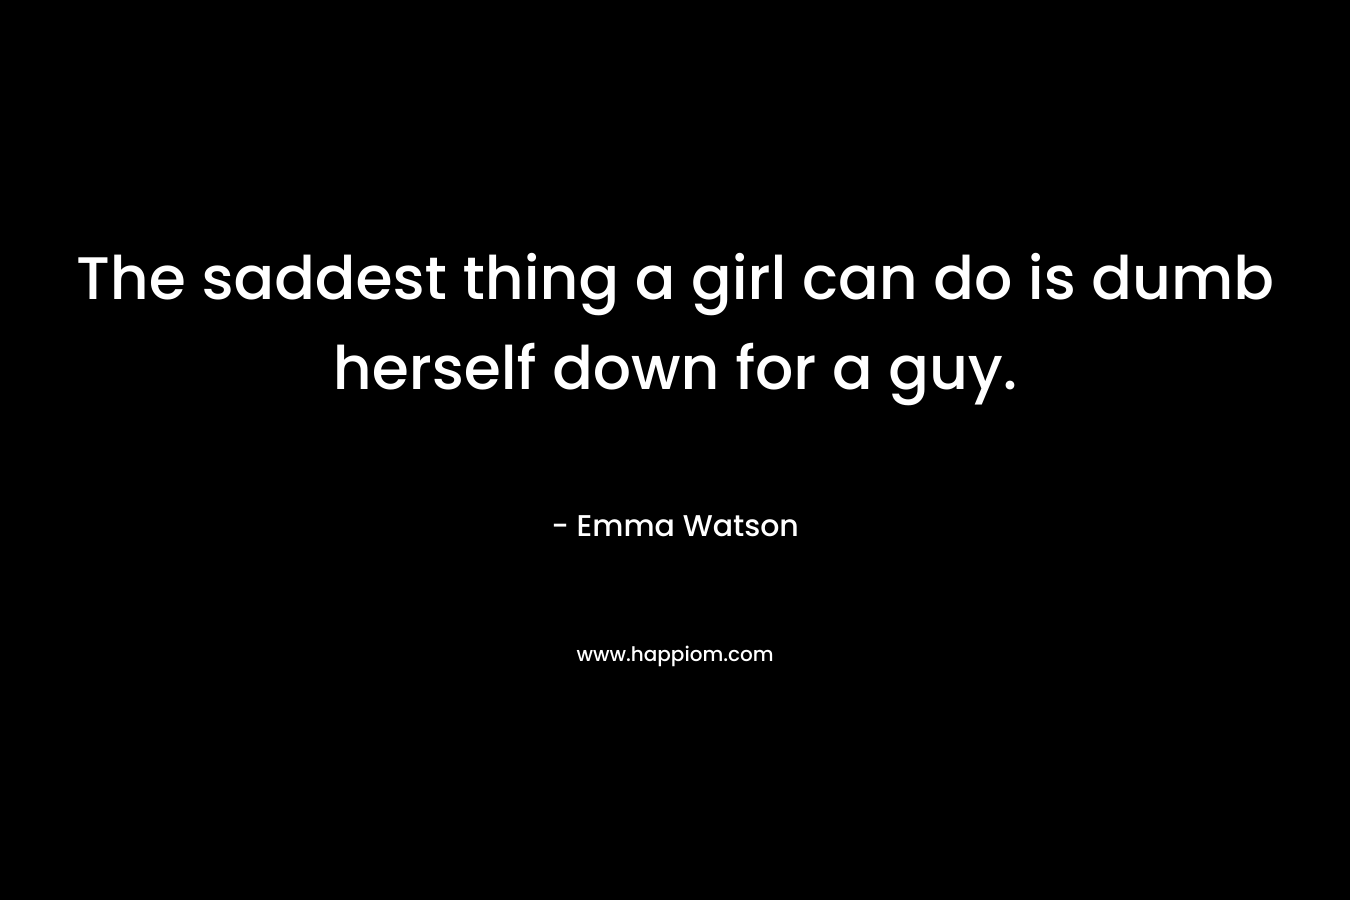 The saddest thing a girl can do is dumb herself down for a guy.